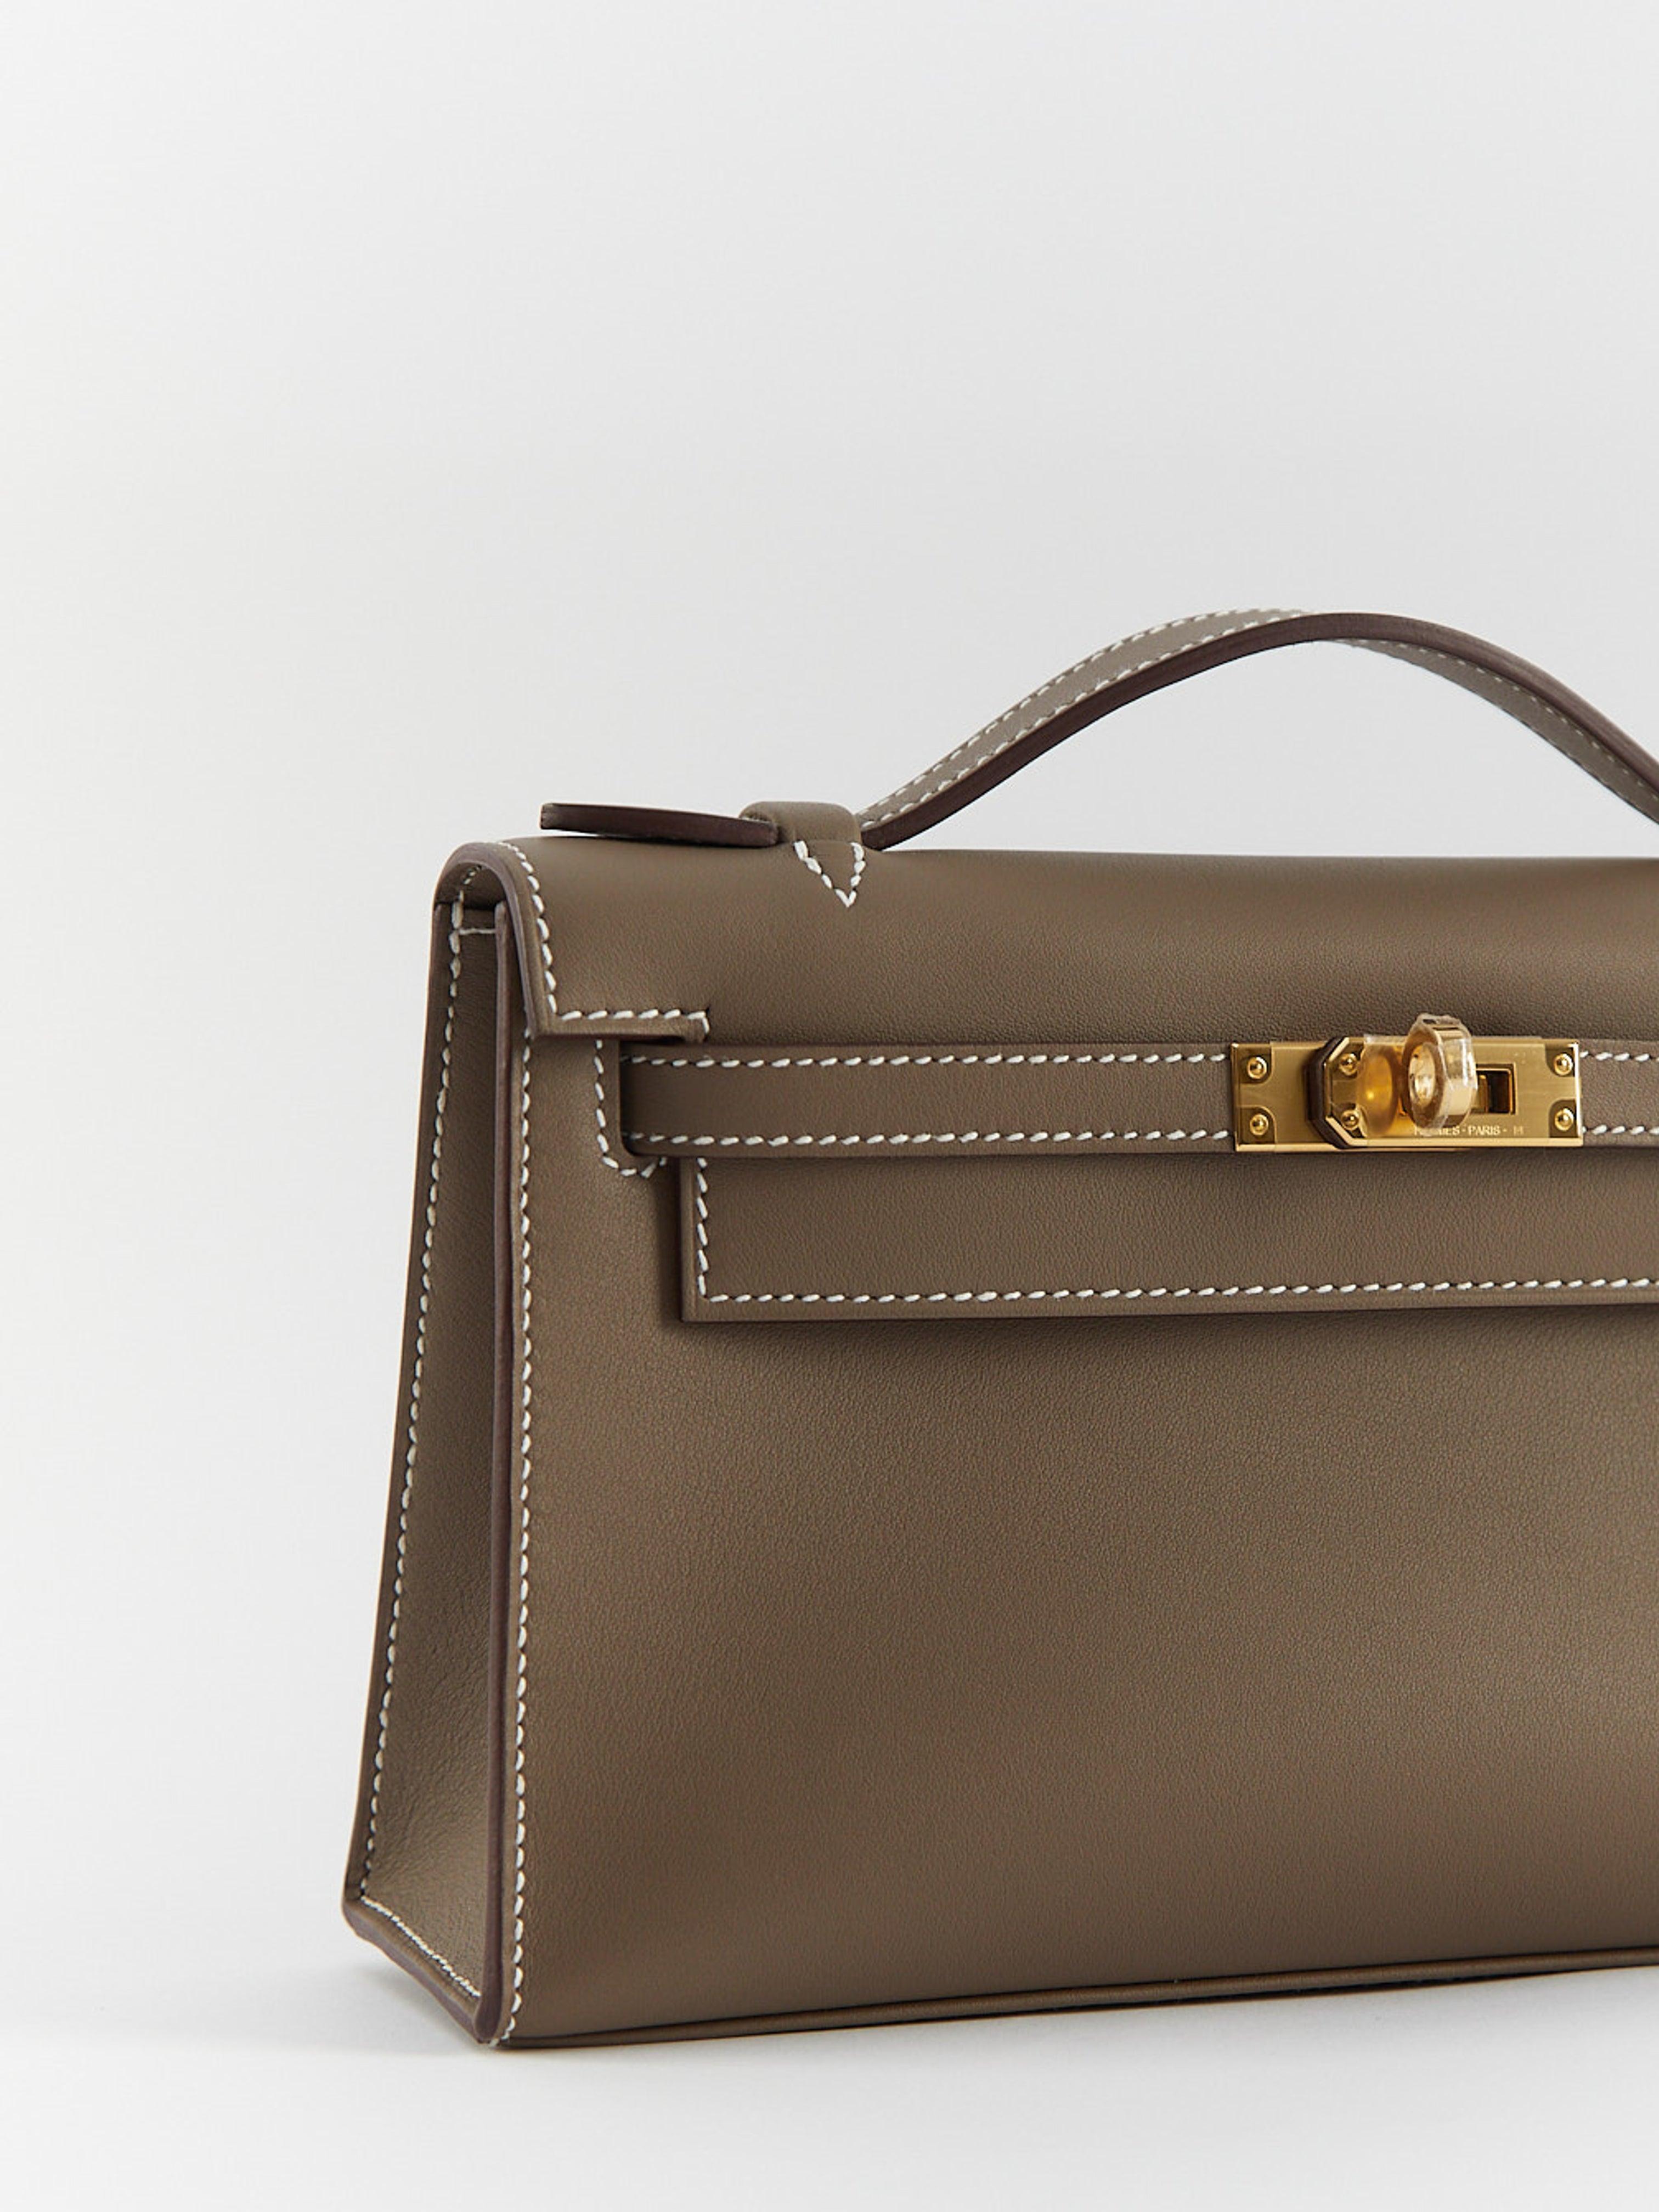 HERMÈS KELLY POCHETTE ETOUPE Swift Leather with Gold Hardware In Excellent Condition For Sale In London, GB